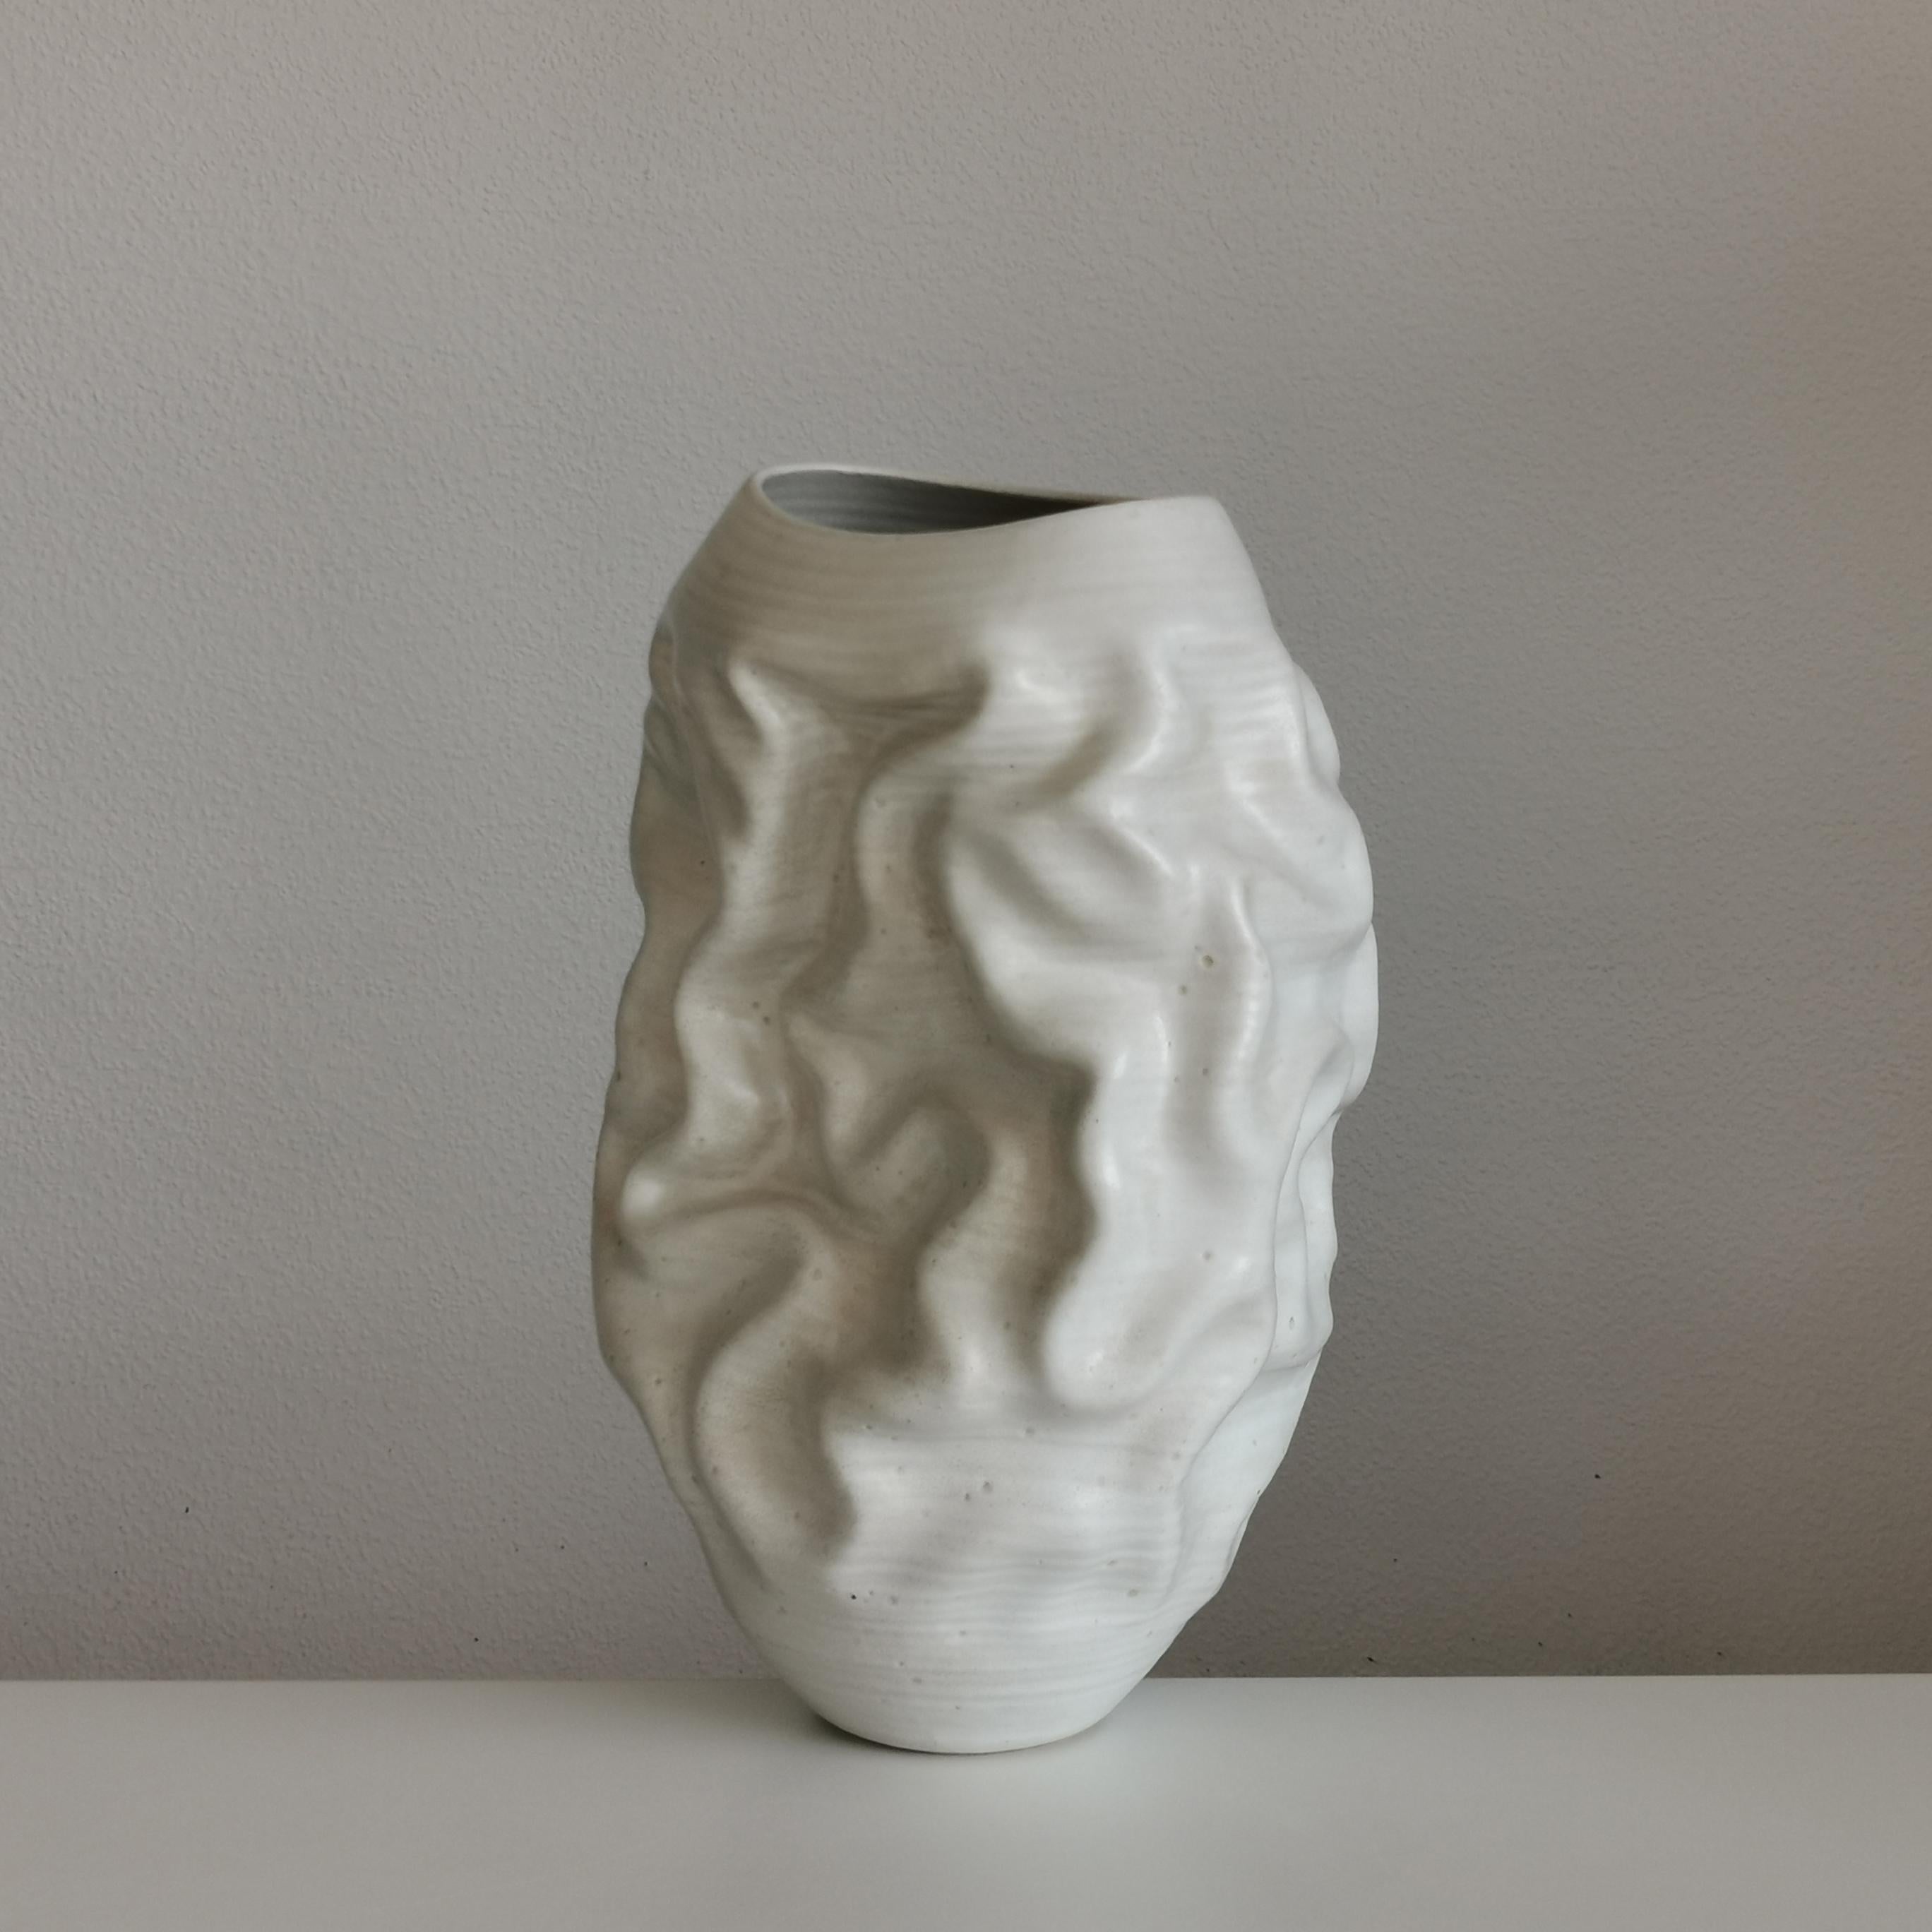 Organic Modern Medium Large White Dehydrated Form, Vessel No.126, Ceramic Sculpture For Sale